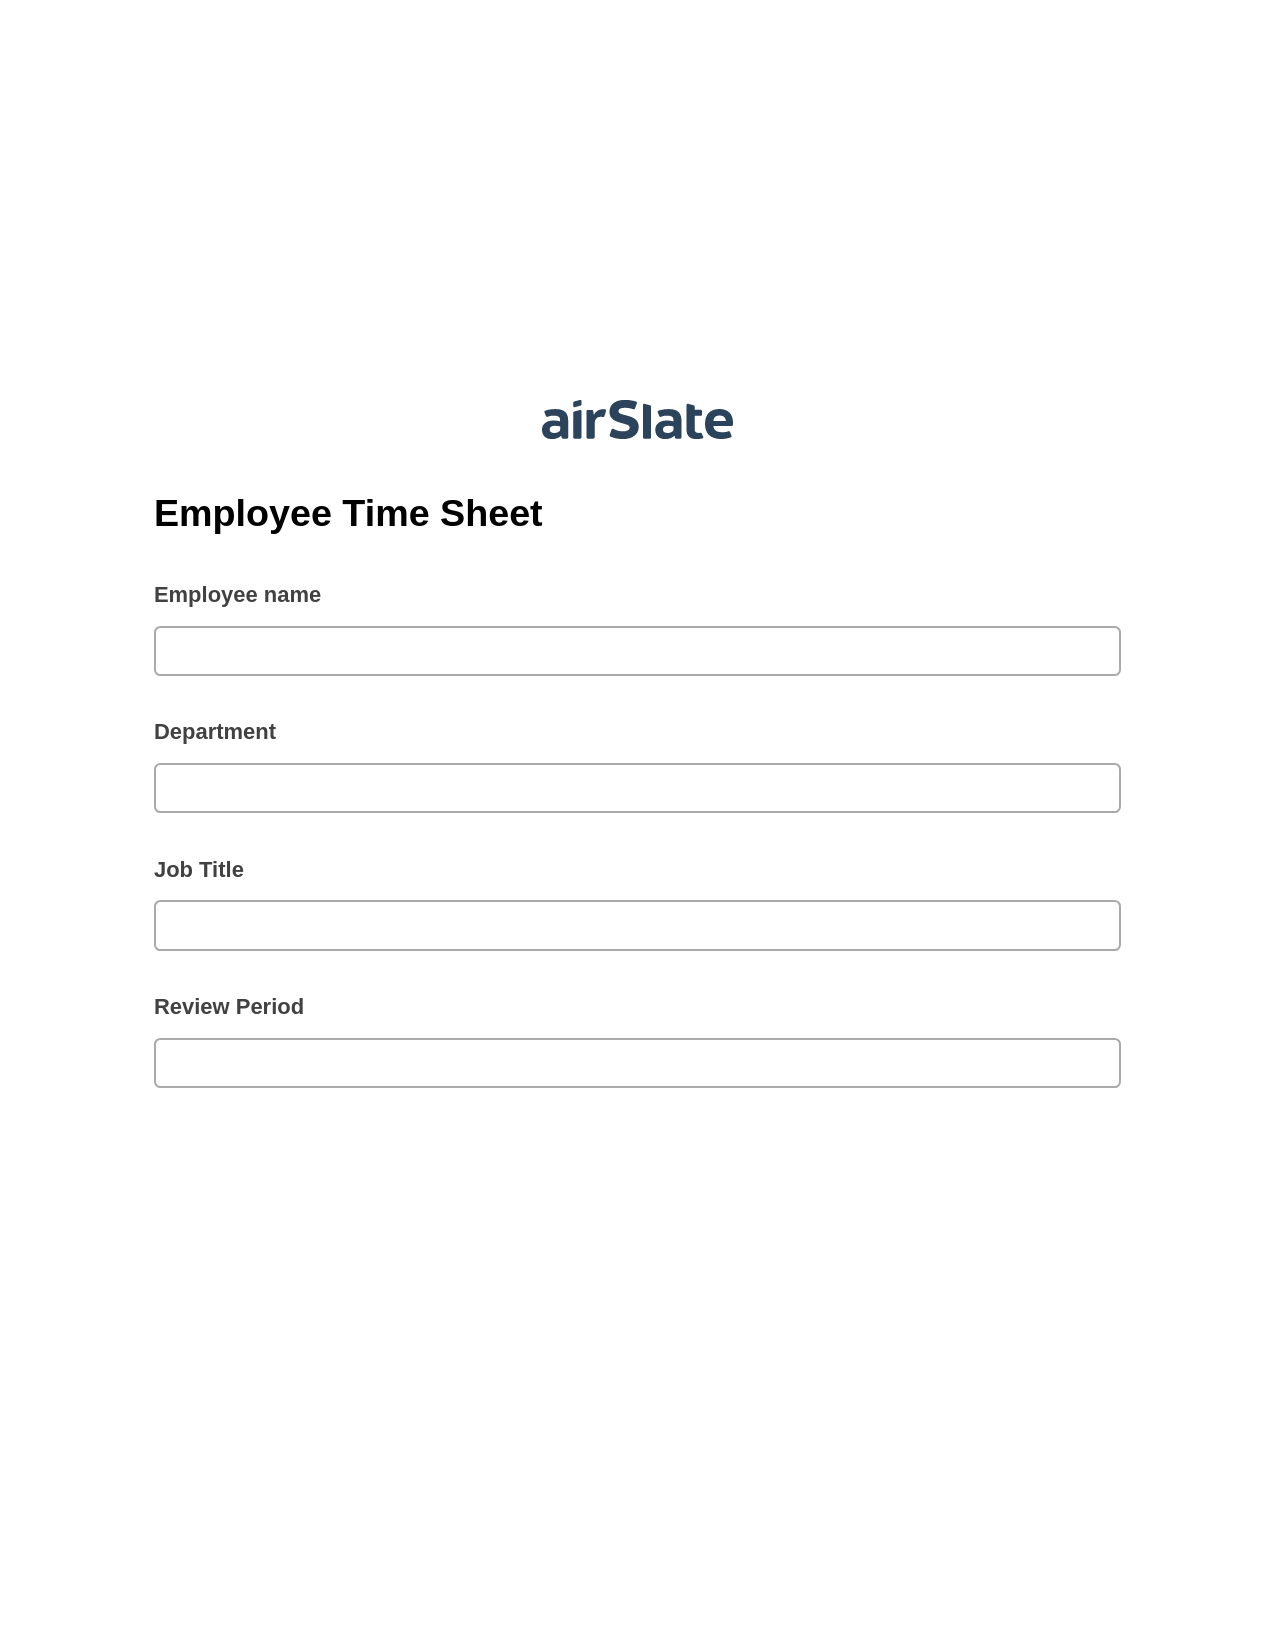 Multirole Employee Time Sheet Pre-fill Dropdowns from CSV file Bot, Create Salesforce Records Bot, Export to Salesforce Record Bot